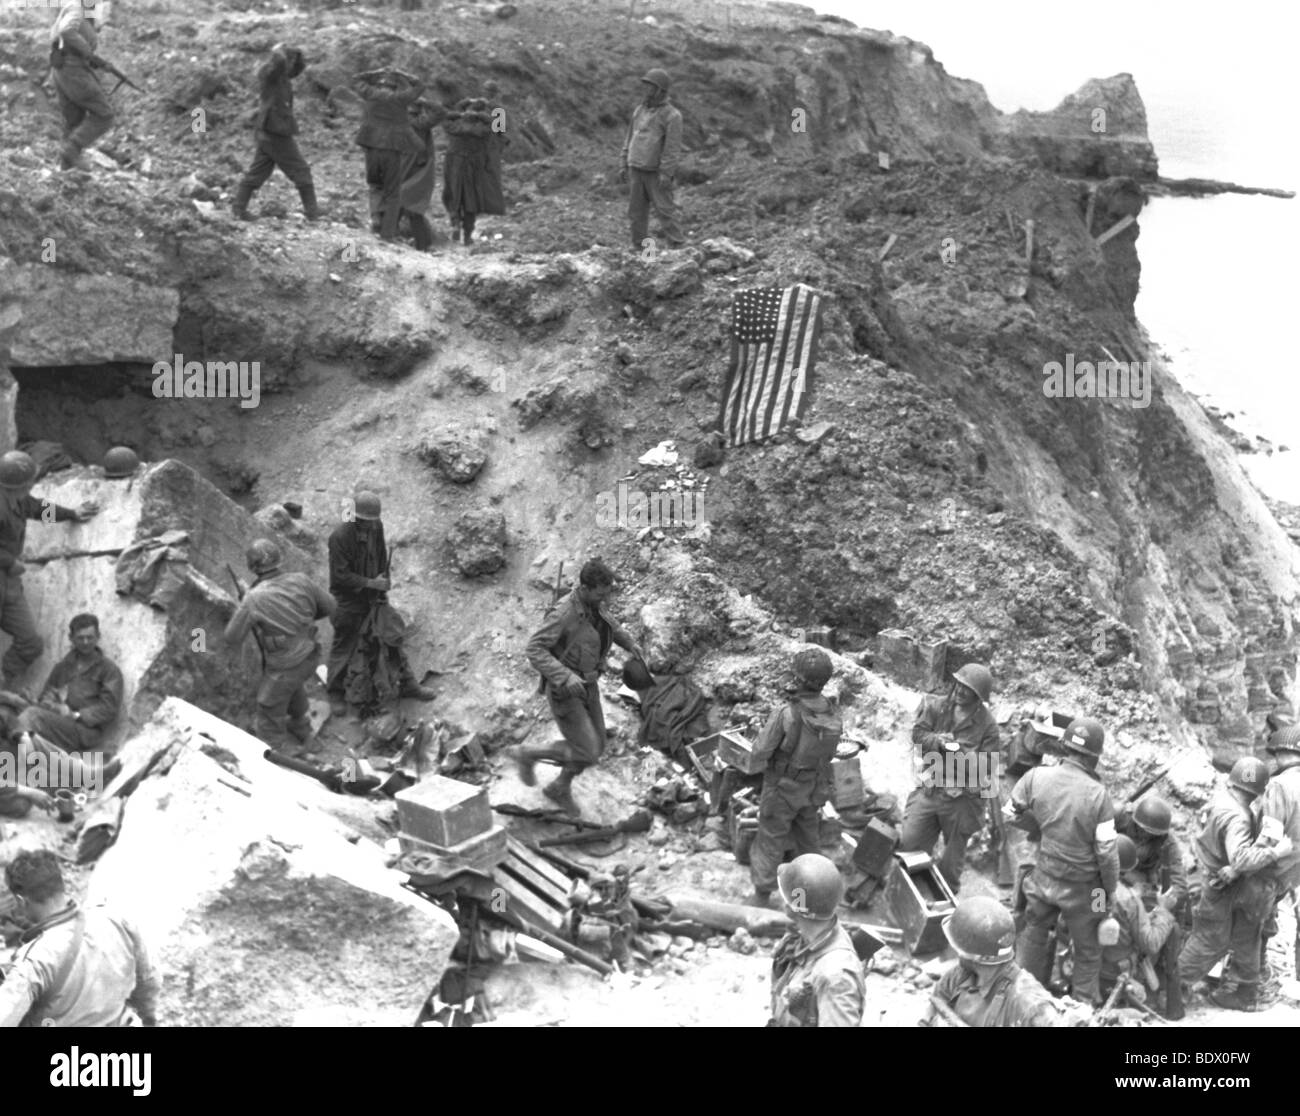 6 JUNE 1944 - US 2nd Ranger Battalion troops collecting  prisoners after their assault on German battery  at Pointe du Hoc Stock Photo